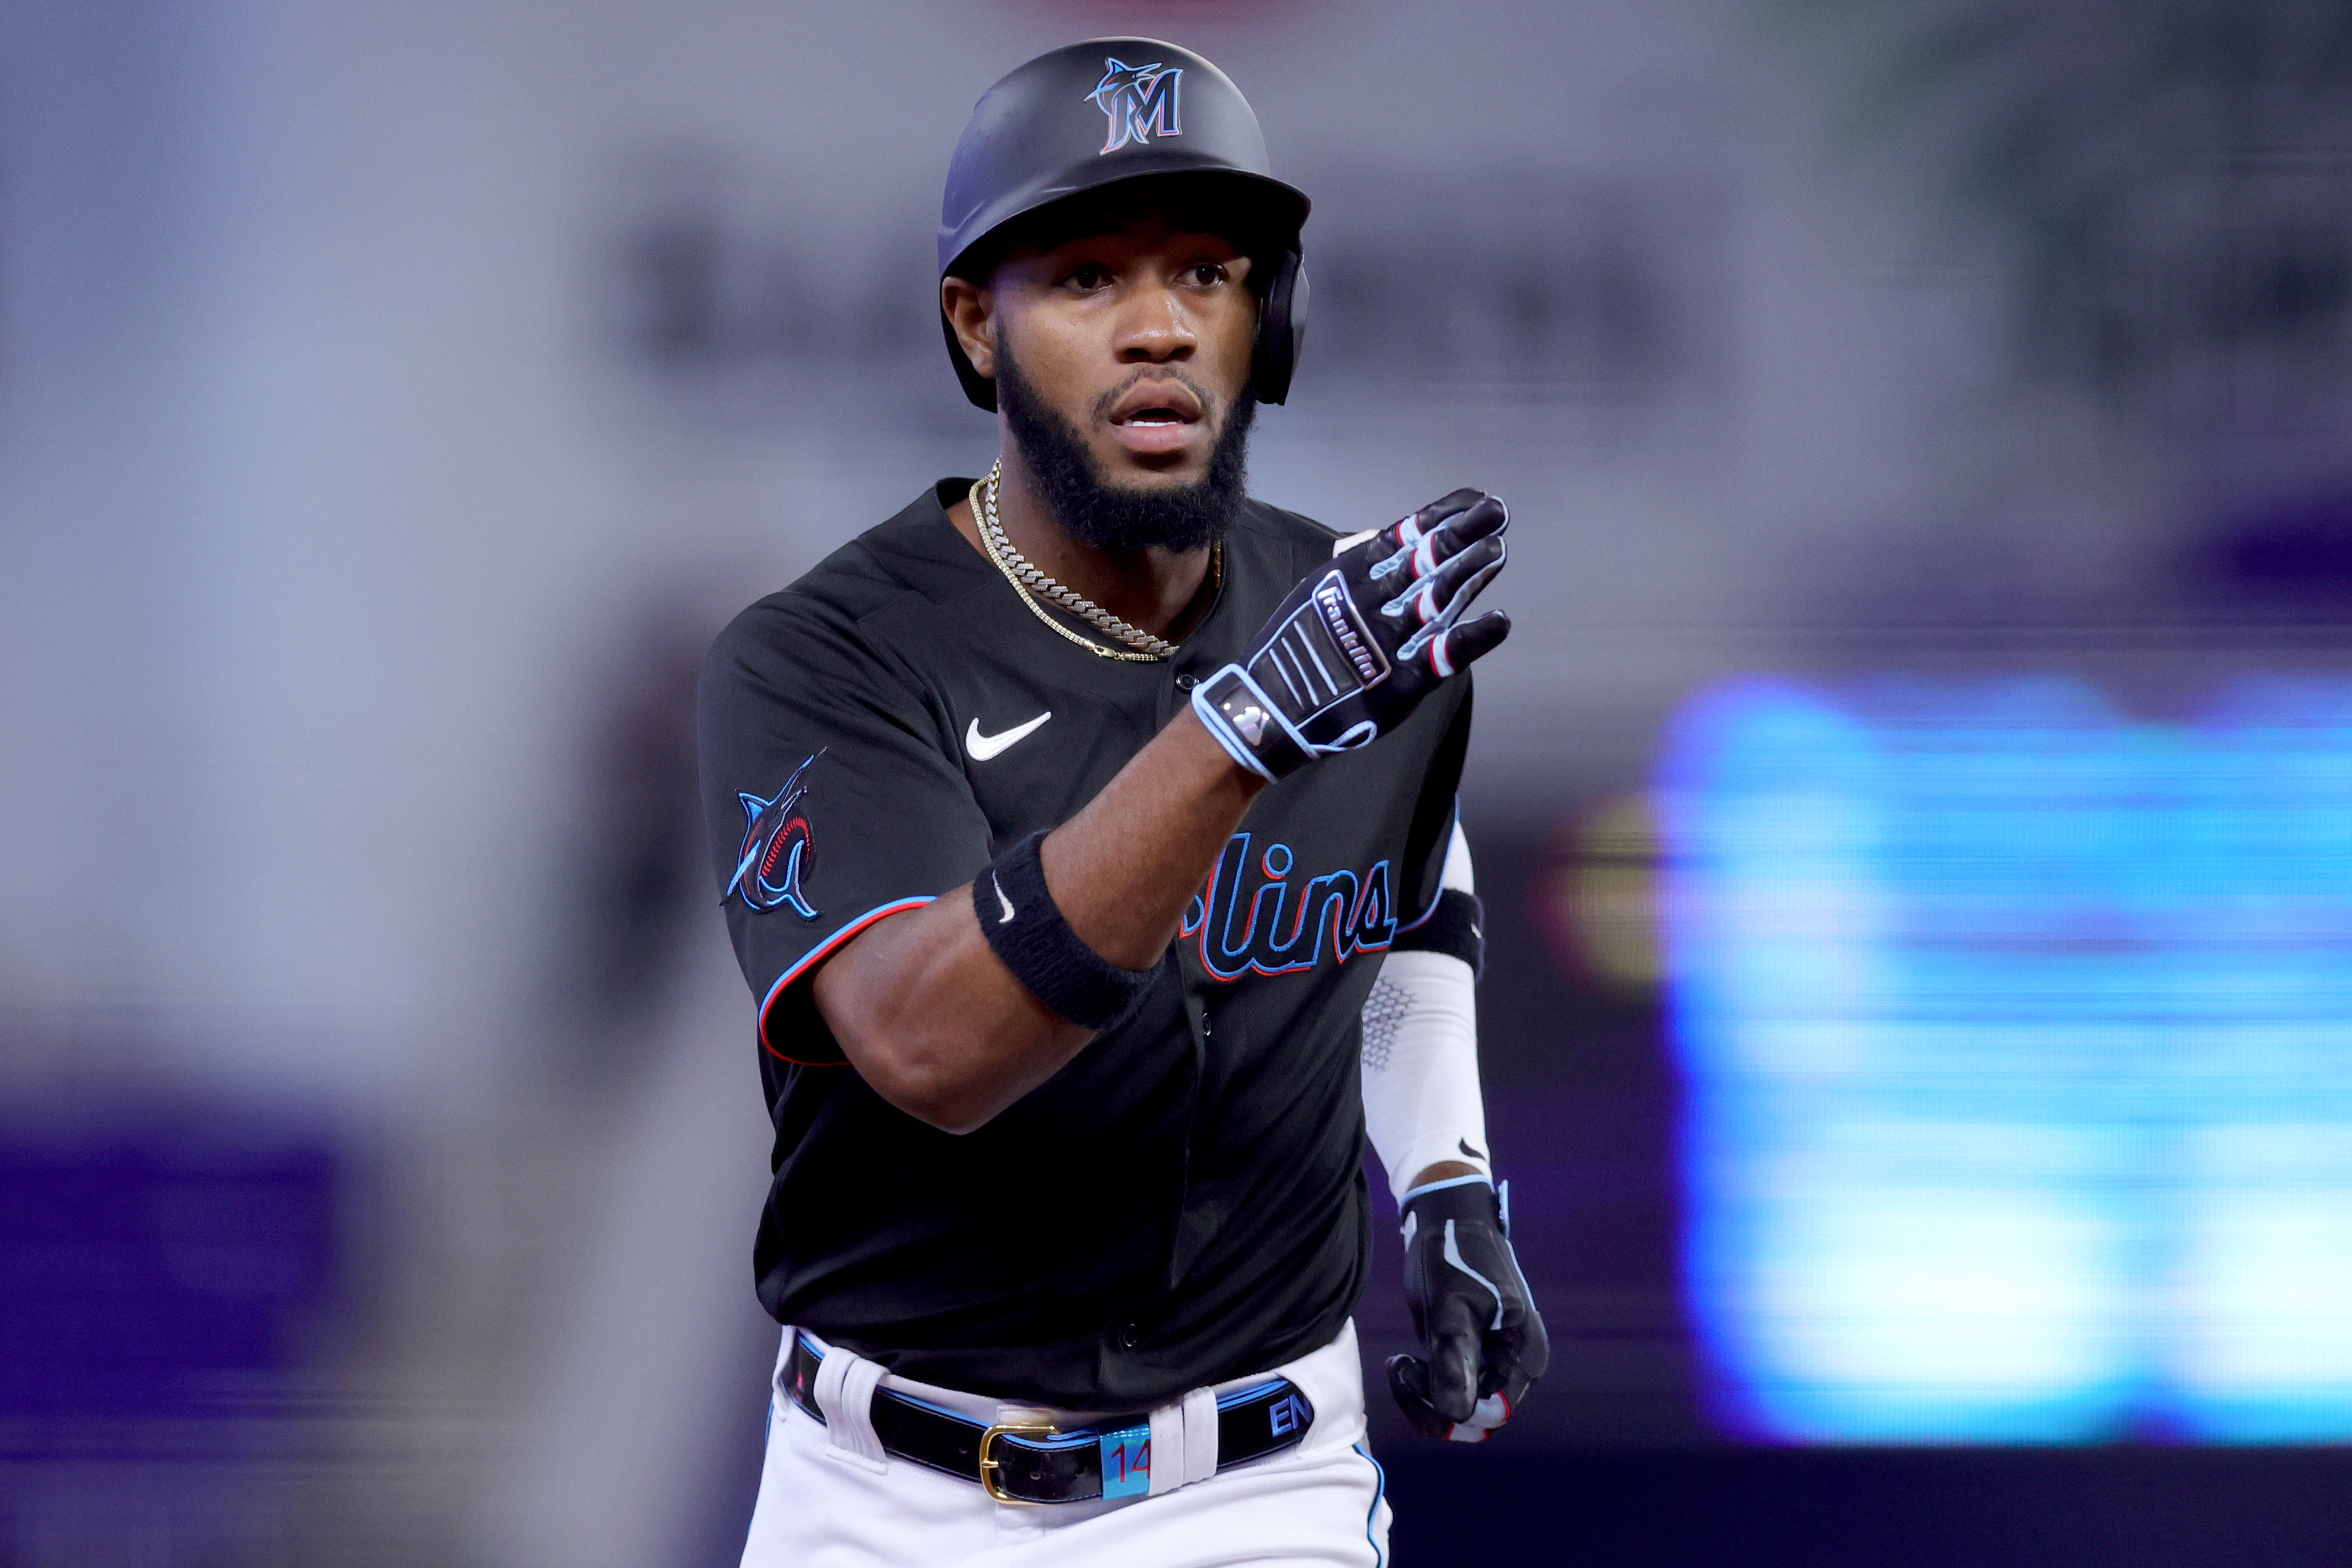 Bryan De La Cruz #14 of the Miami Marlins rounds the bases after hitting a home run against the Washington Nationals during the second inning at loanDepot park on May 18, 2023 in Miami, Florida